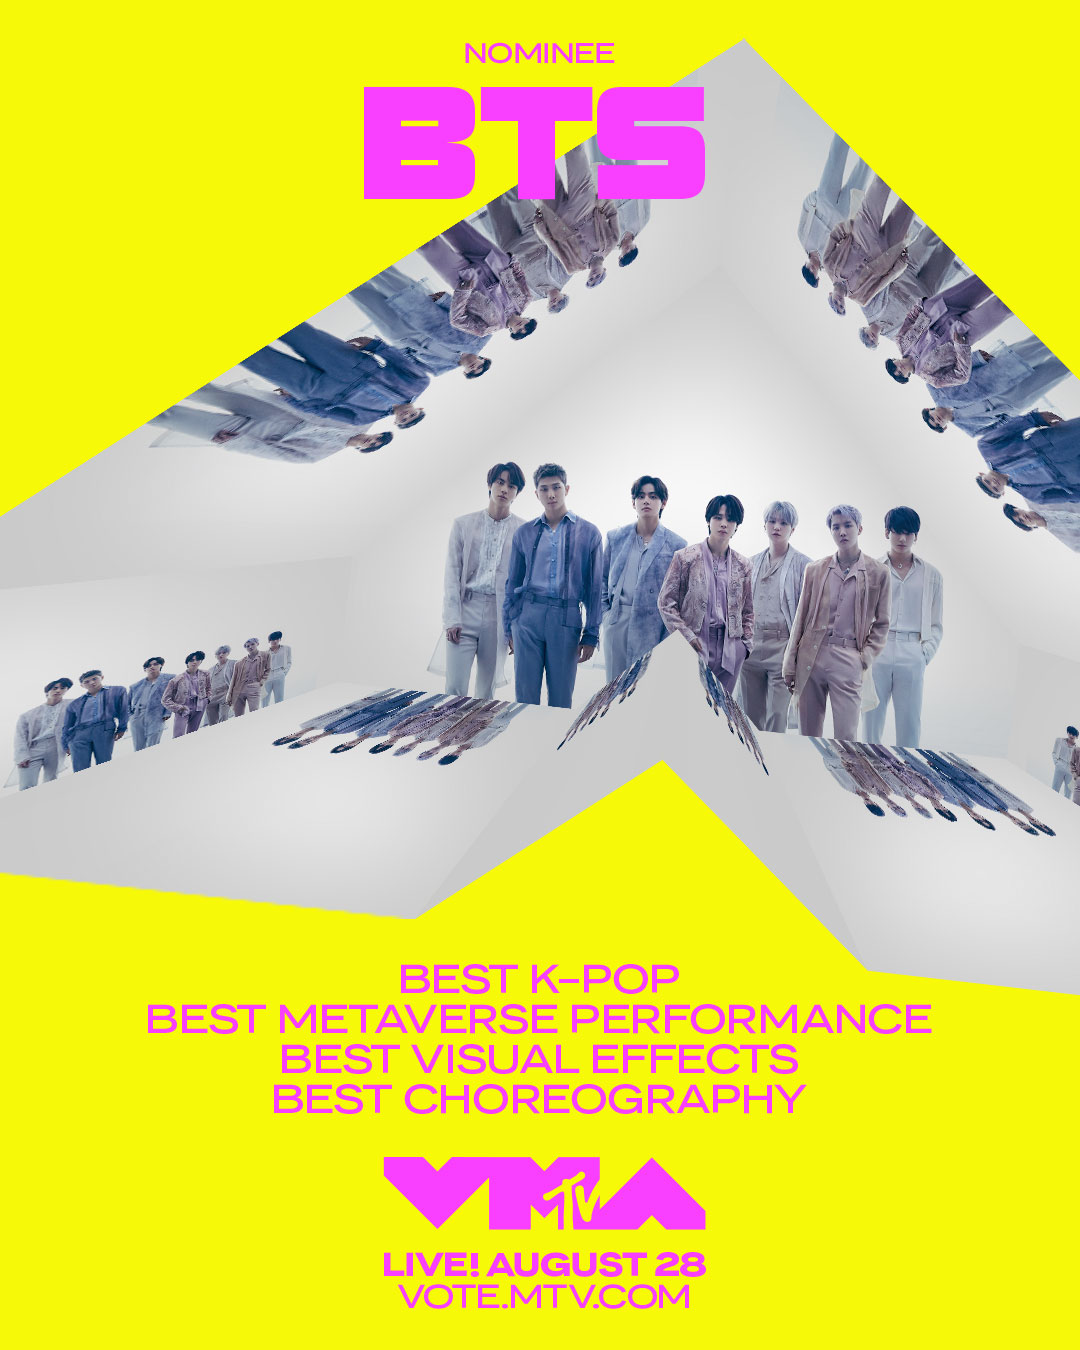 [instiz] THE KPOP ARTISTS WHO WERE NOMINATED FOR VMA